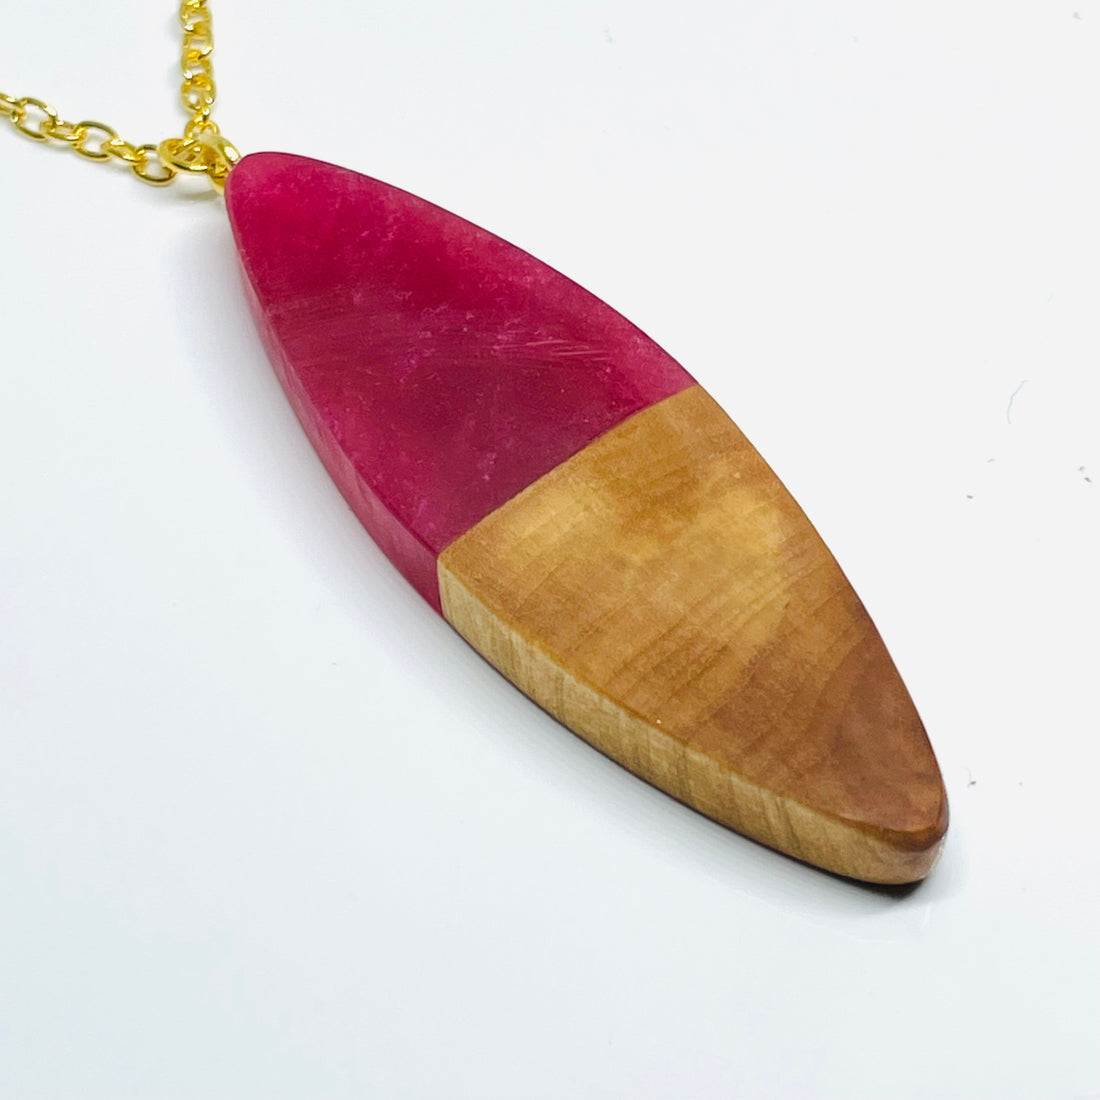 handmade jewelry, Minnesota local wood and resin artist. handmade maple wood with raspberry red resin pendant necklace, 15" gold colored stainless steel chain